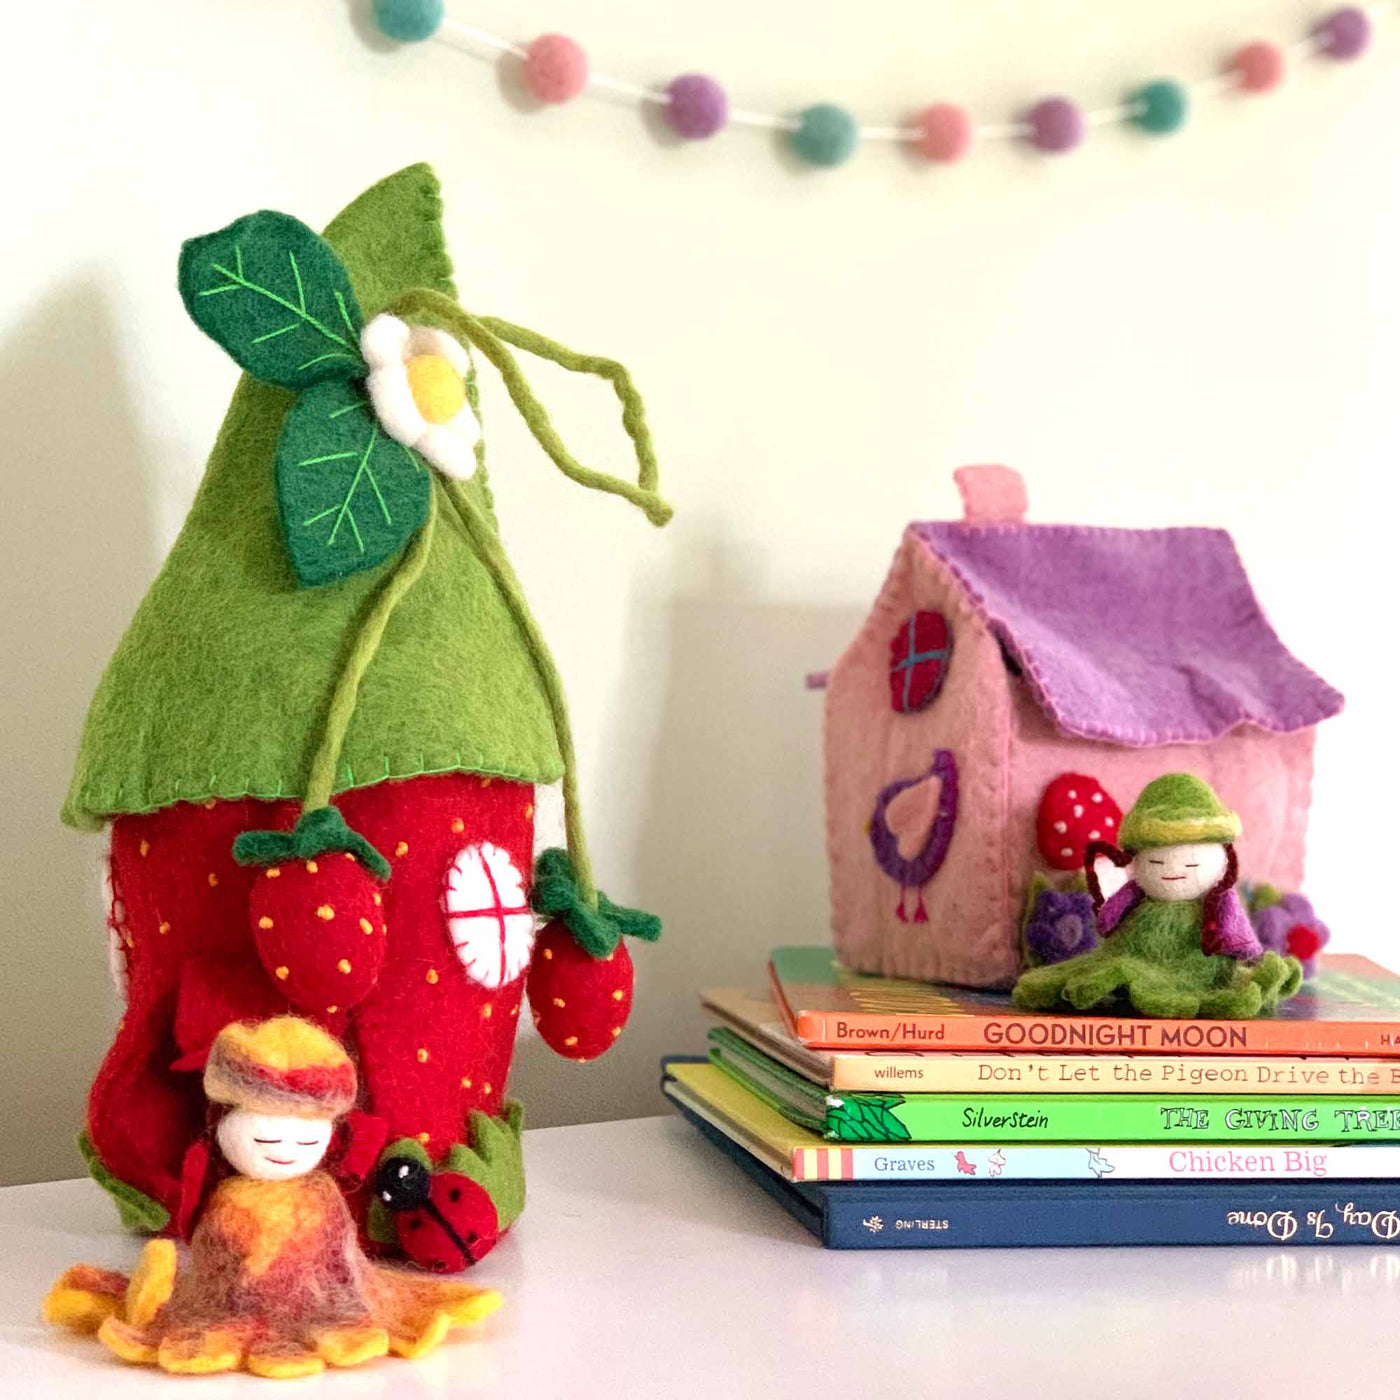 Felted Strawberry Fairy House - Global Groove - Yvonne’s 100th Wish Inc